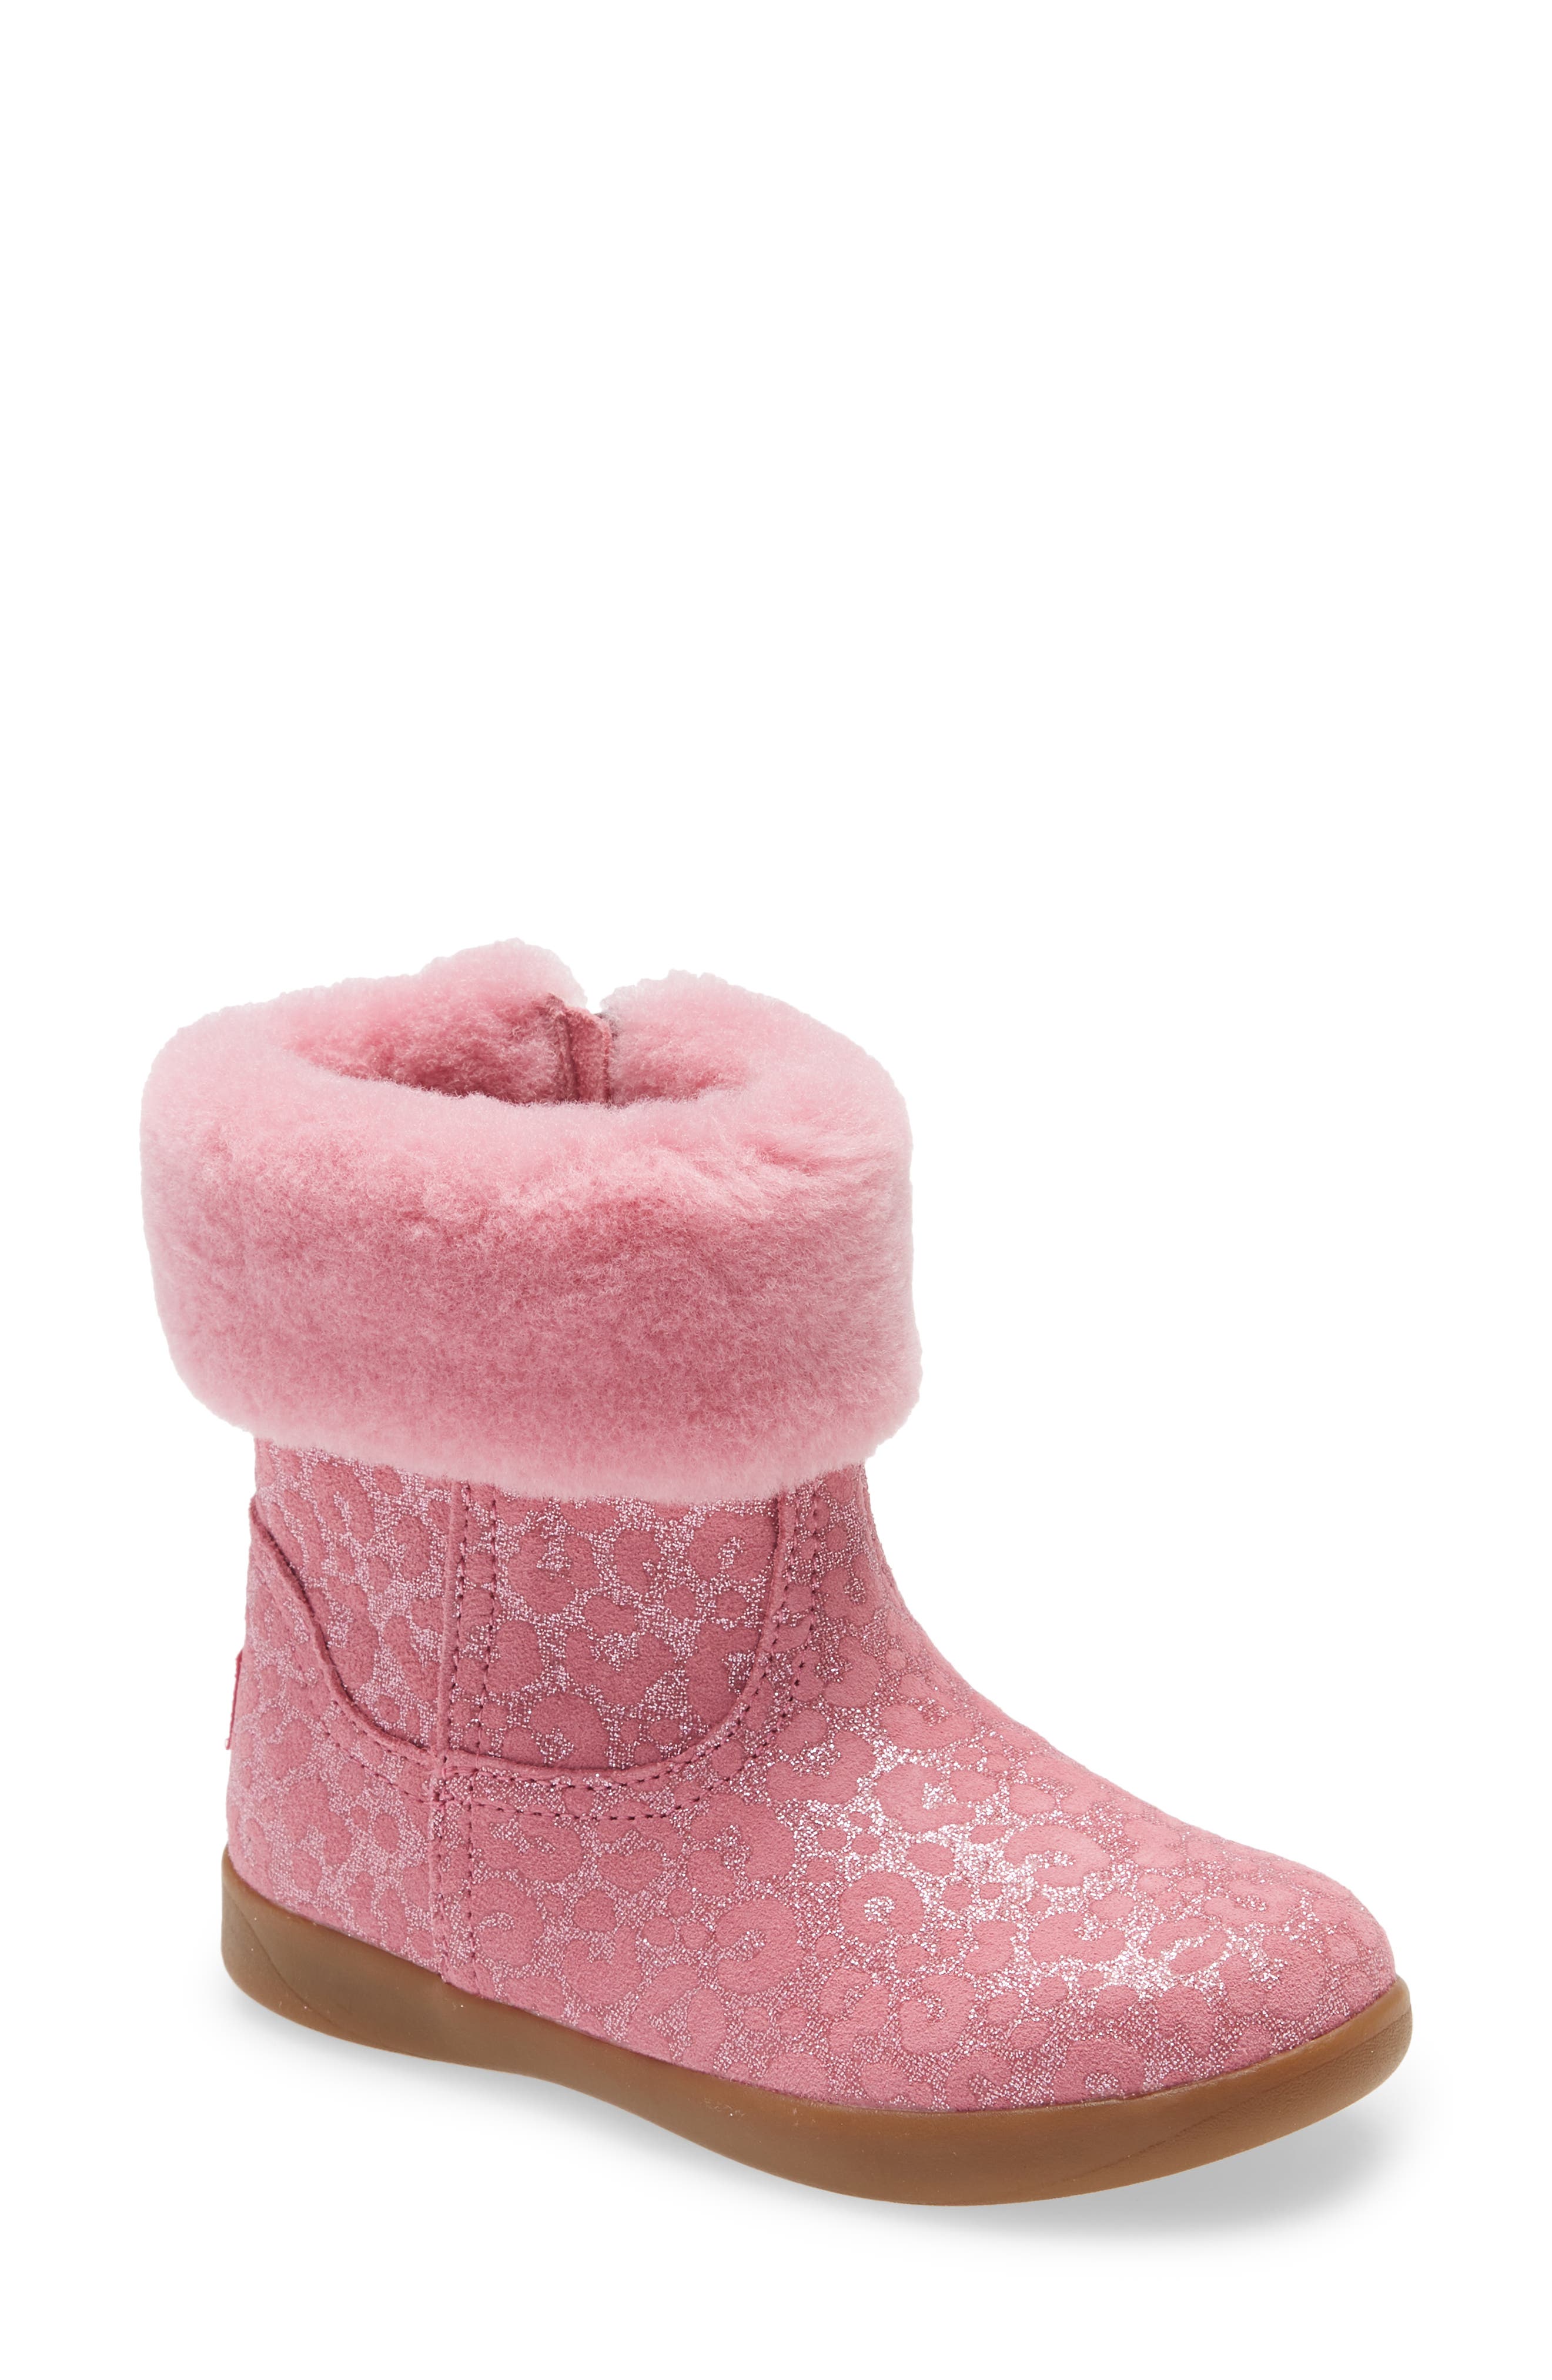 baby pink ugg boots